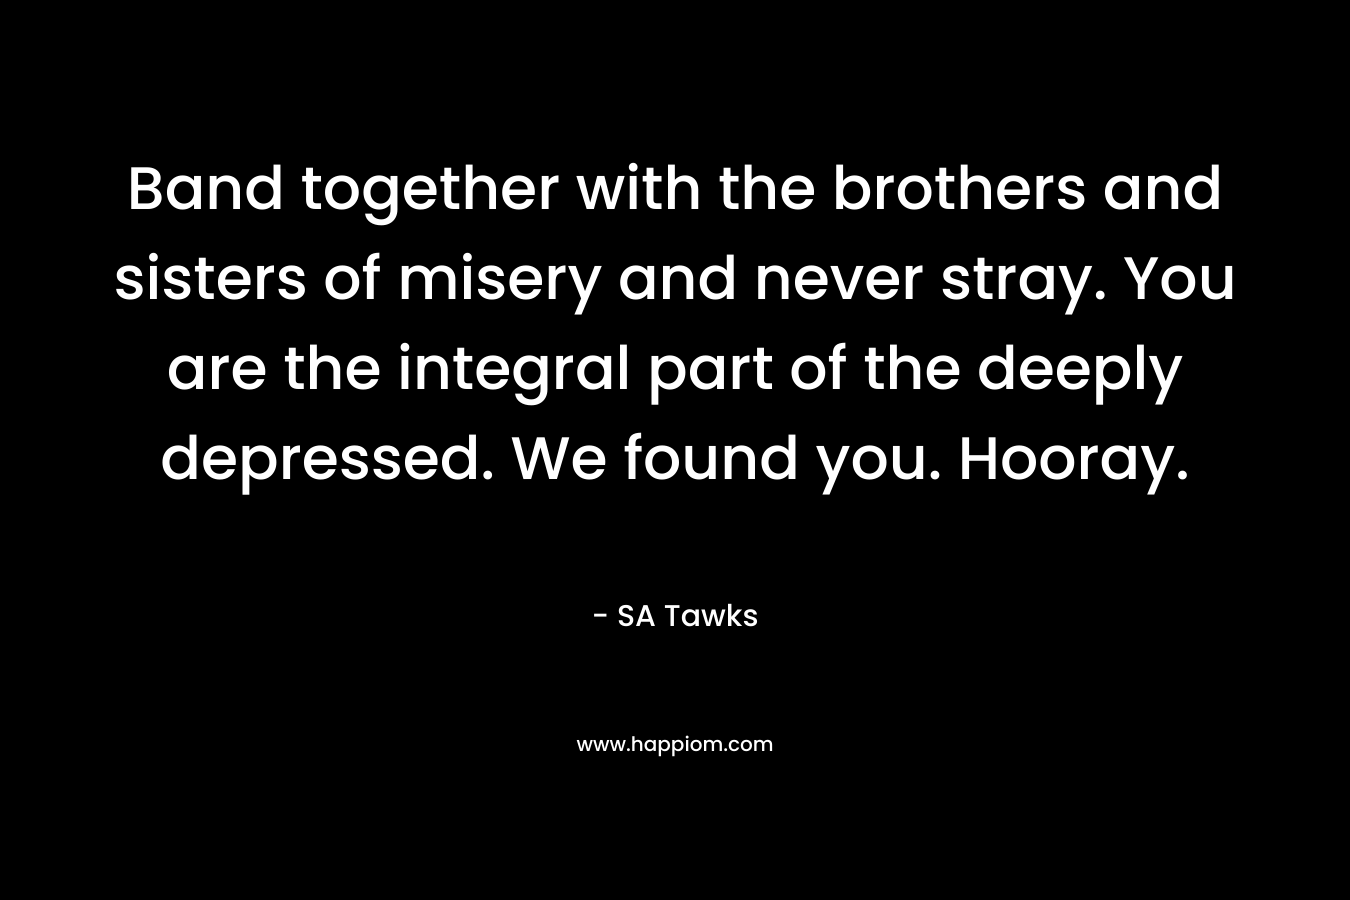 Band together with the brothers and sisters of misery and never stray. You are the integral part of the deeply depressed. We found you. Hooray. – SA Tawks